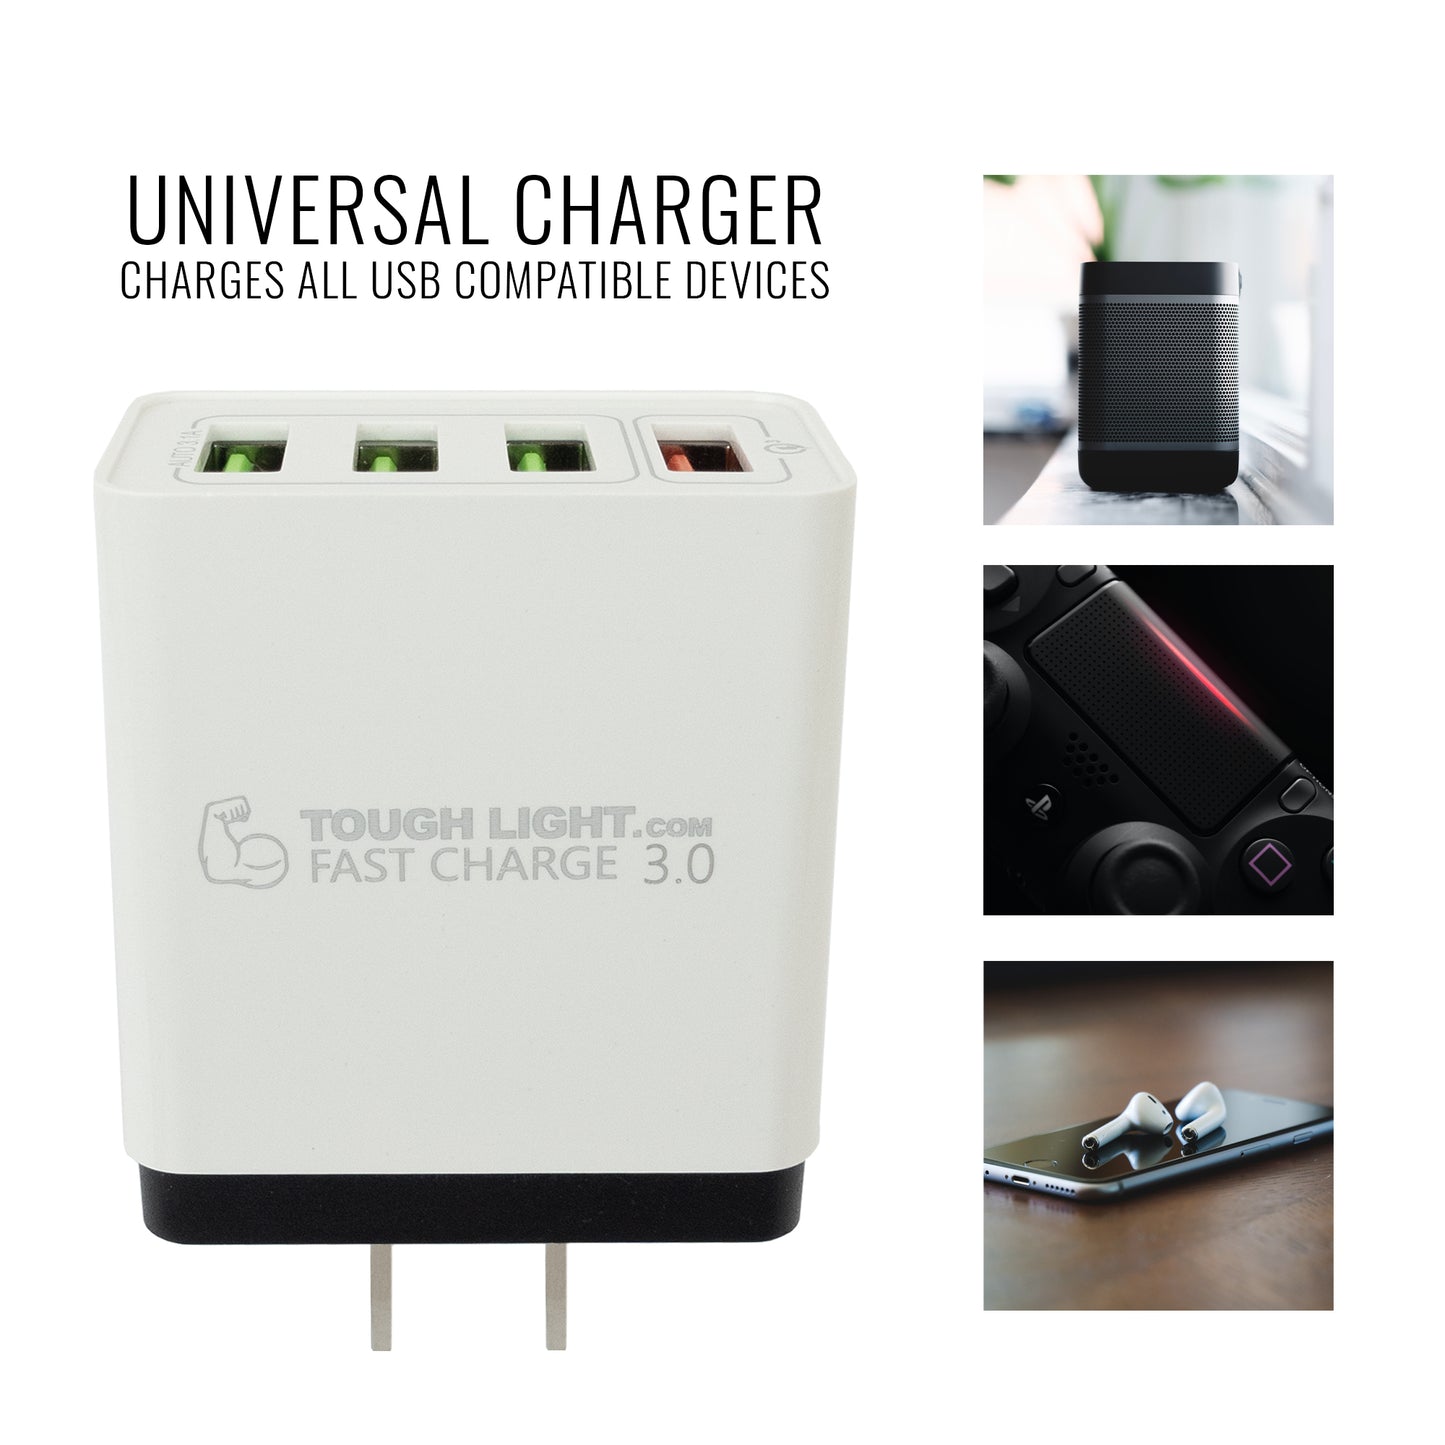 Tough Light USB Quick Wall Charger Fast Charge 3.0 Adaptive 18W